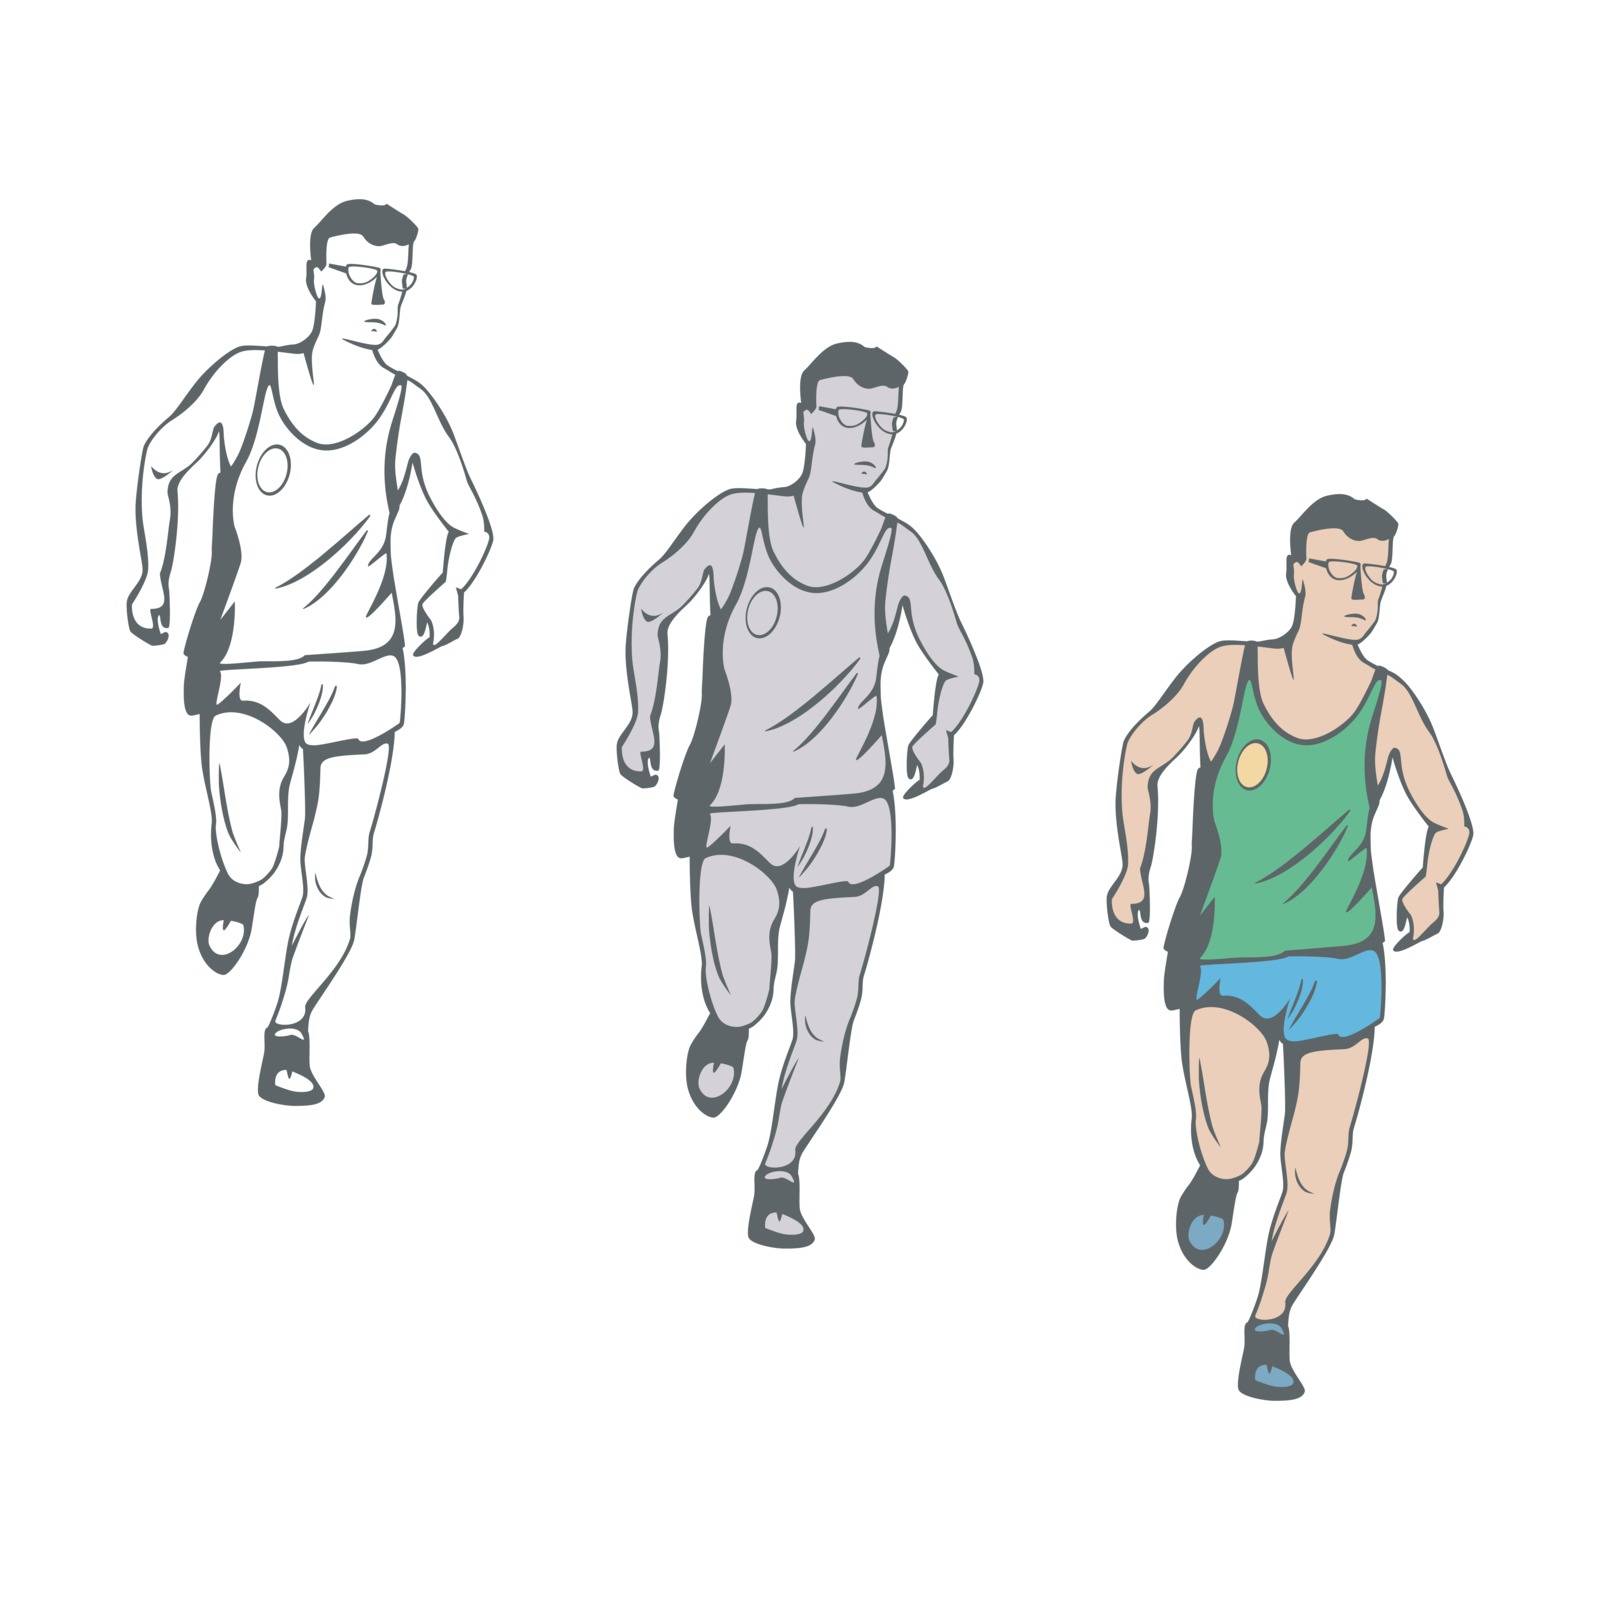 the adult man runs forward. a set of three figures of different colors.